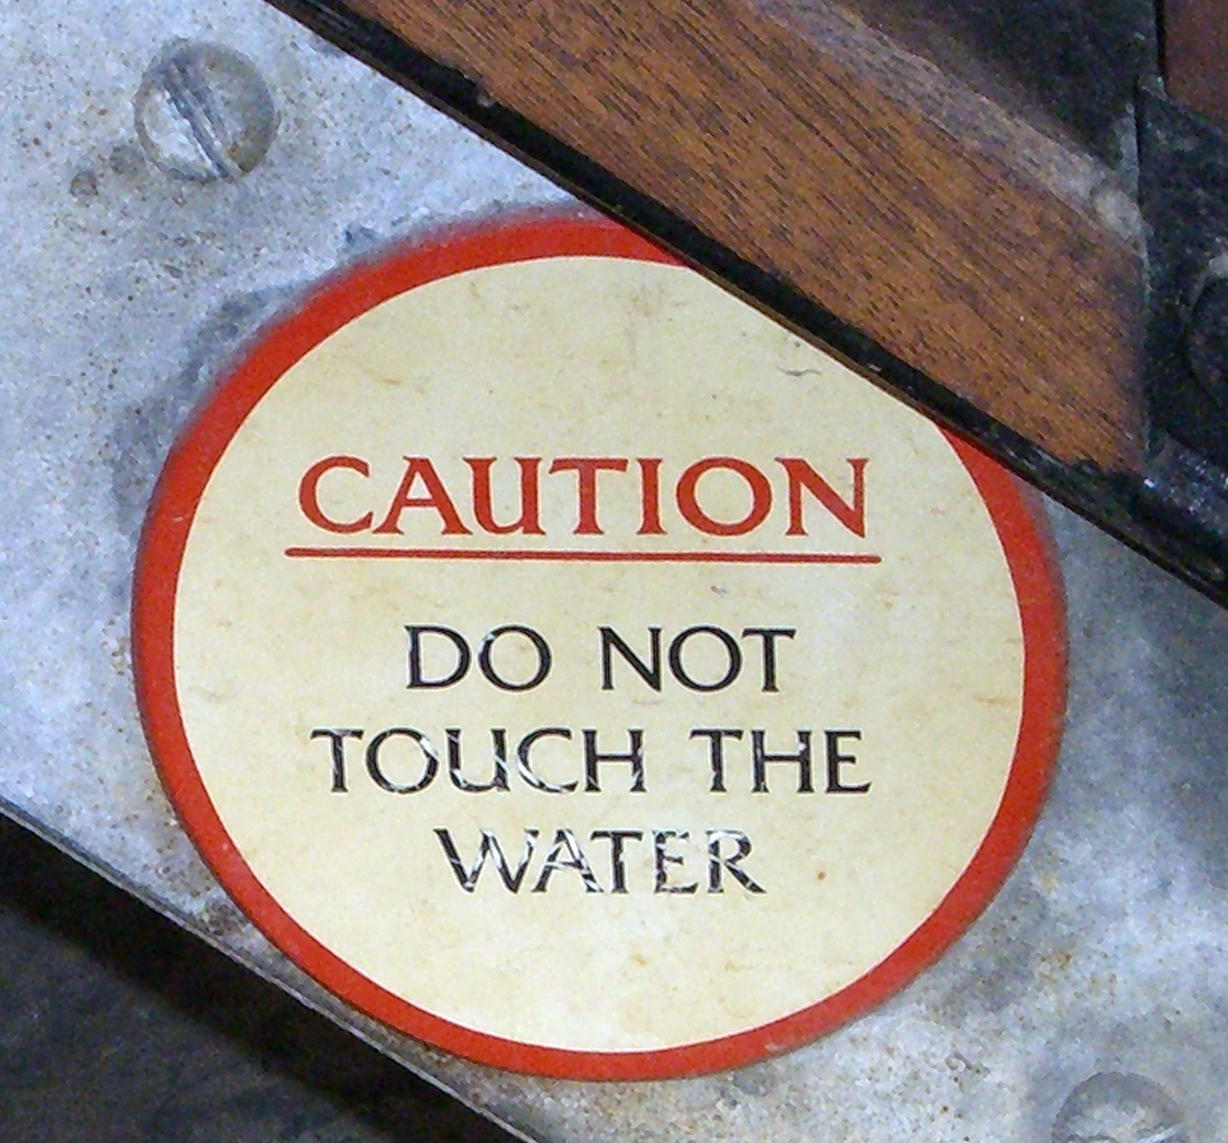 Do not touch the water sign